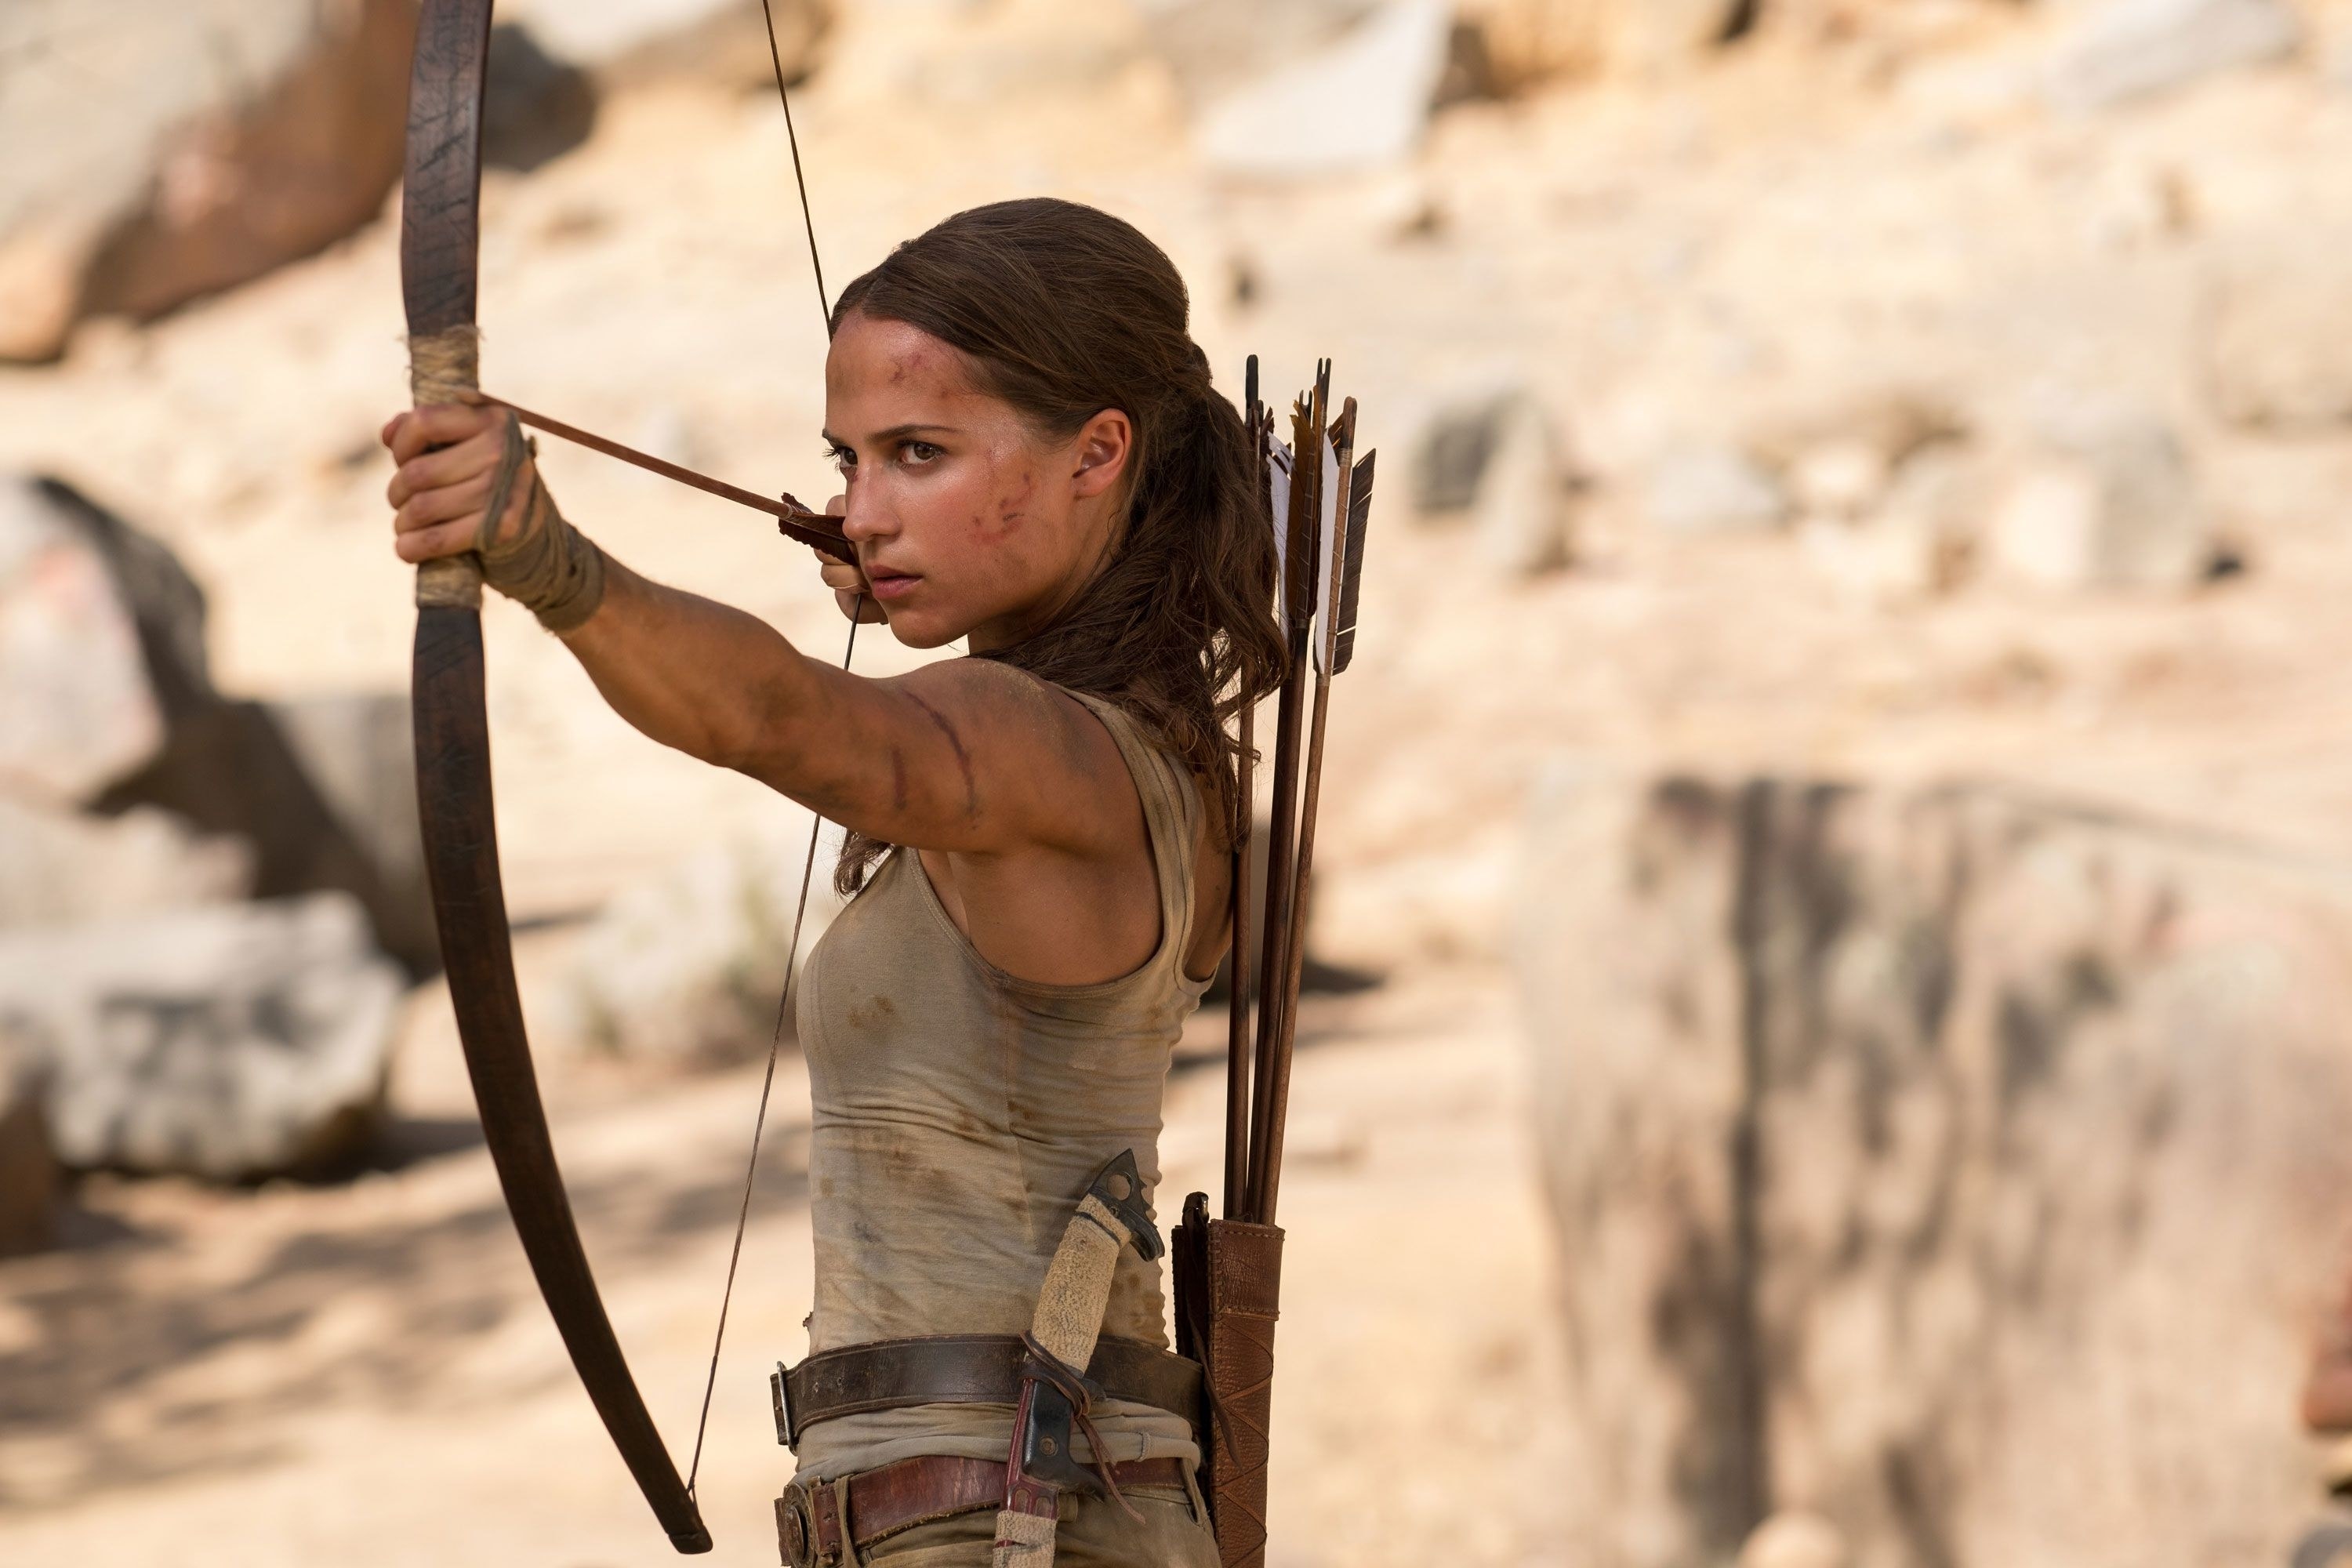 lara croft played by alicia vikander holds a bow ready to fire an arrow